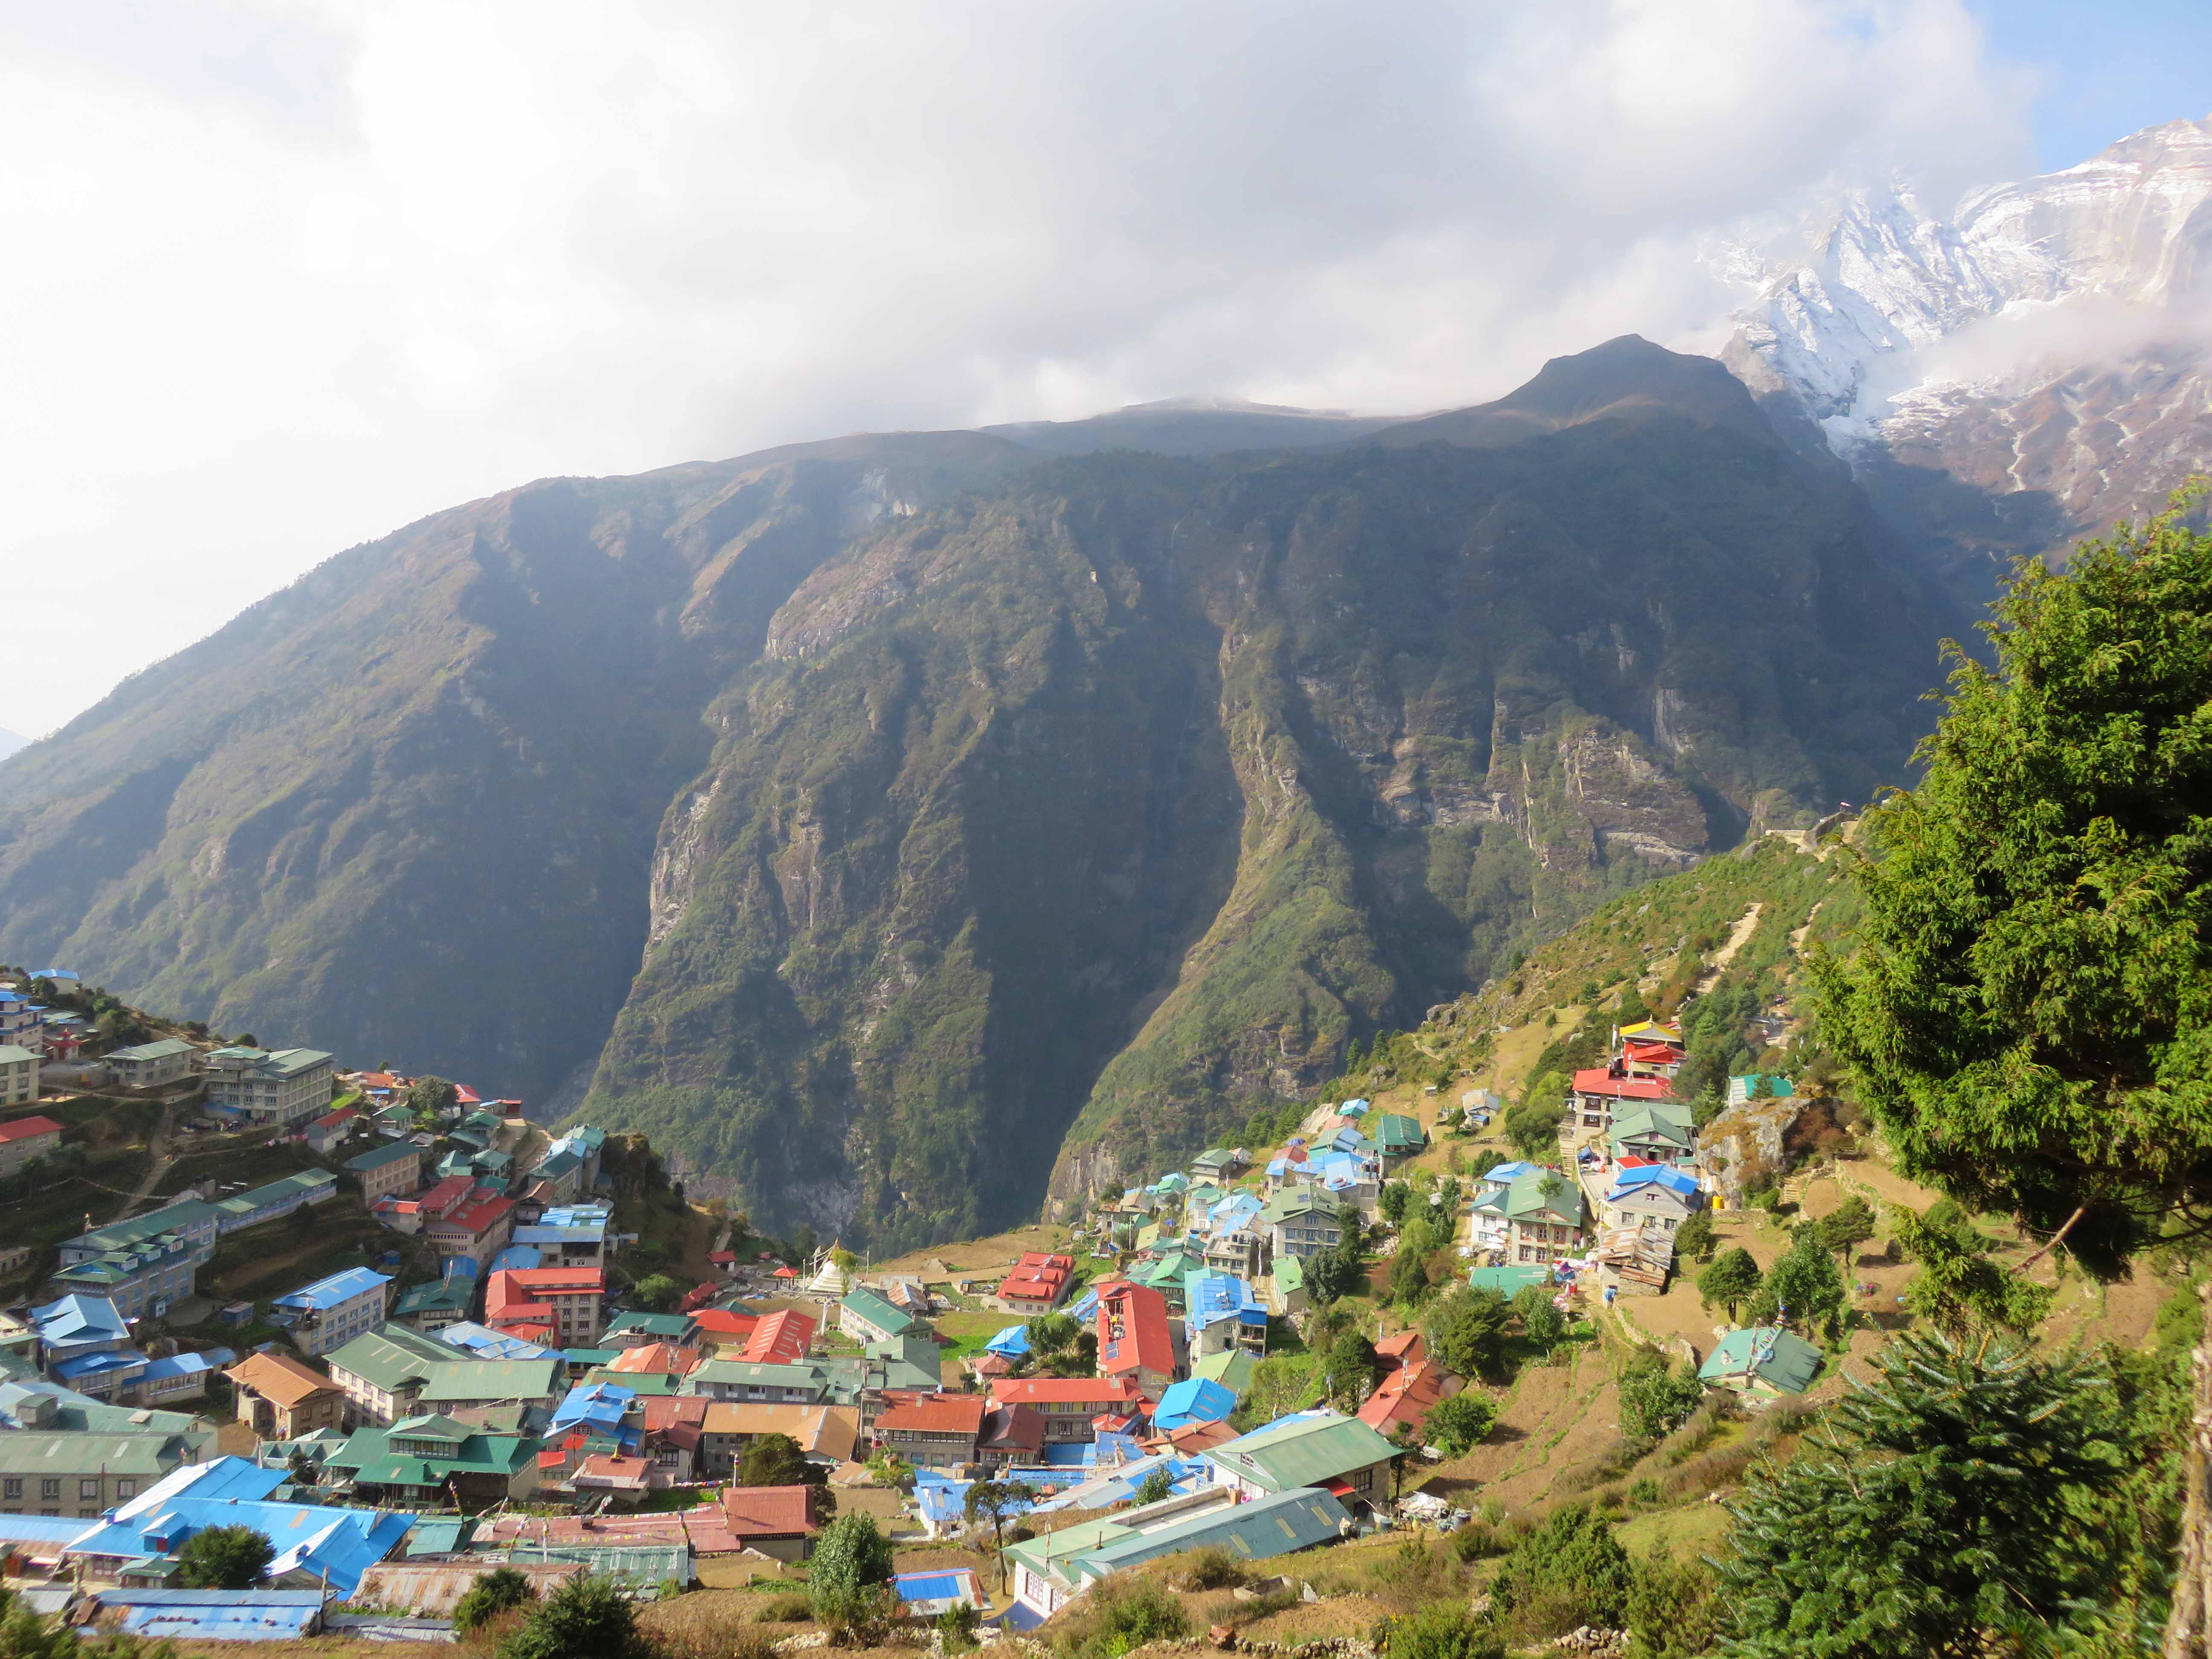 view of namche bazaar from a nearby hill